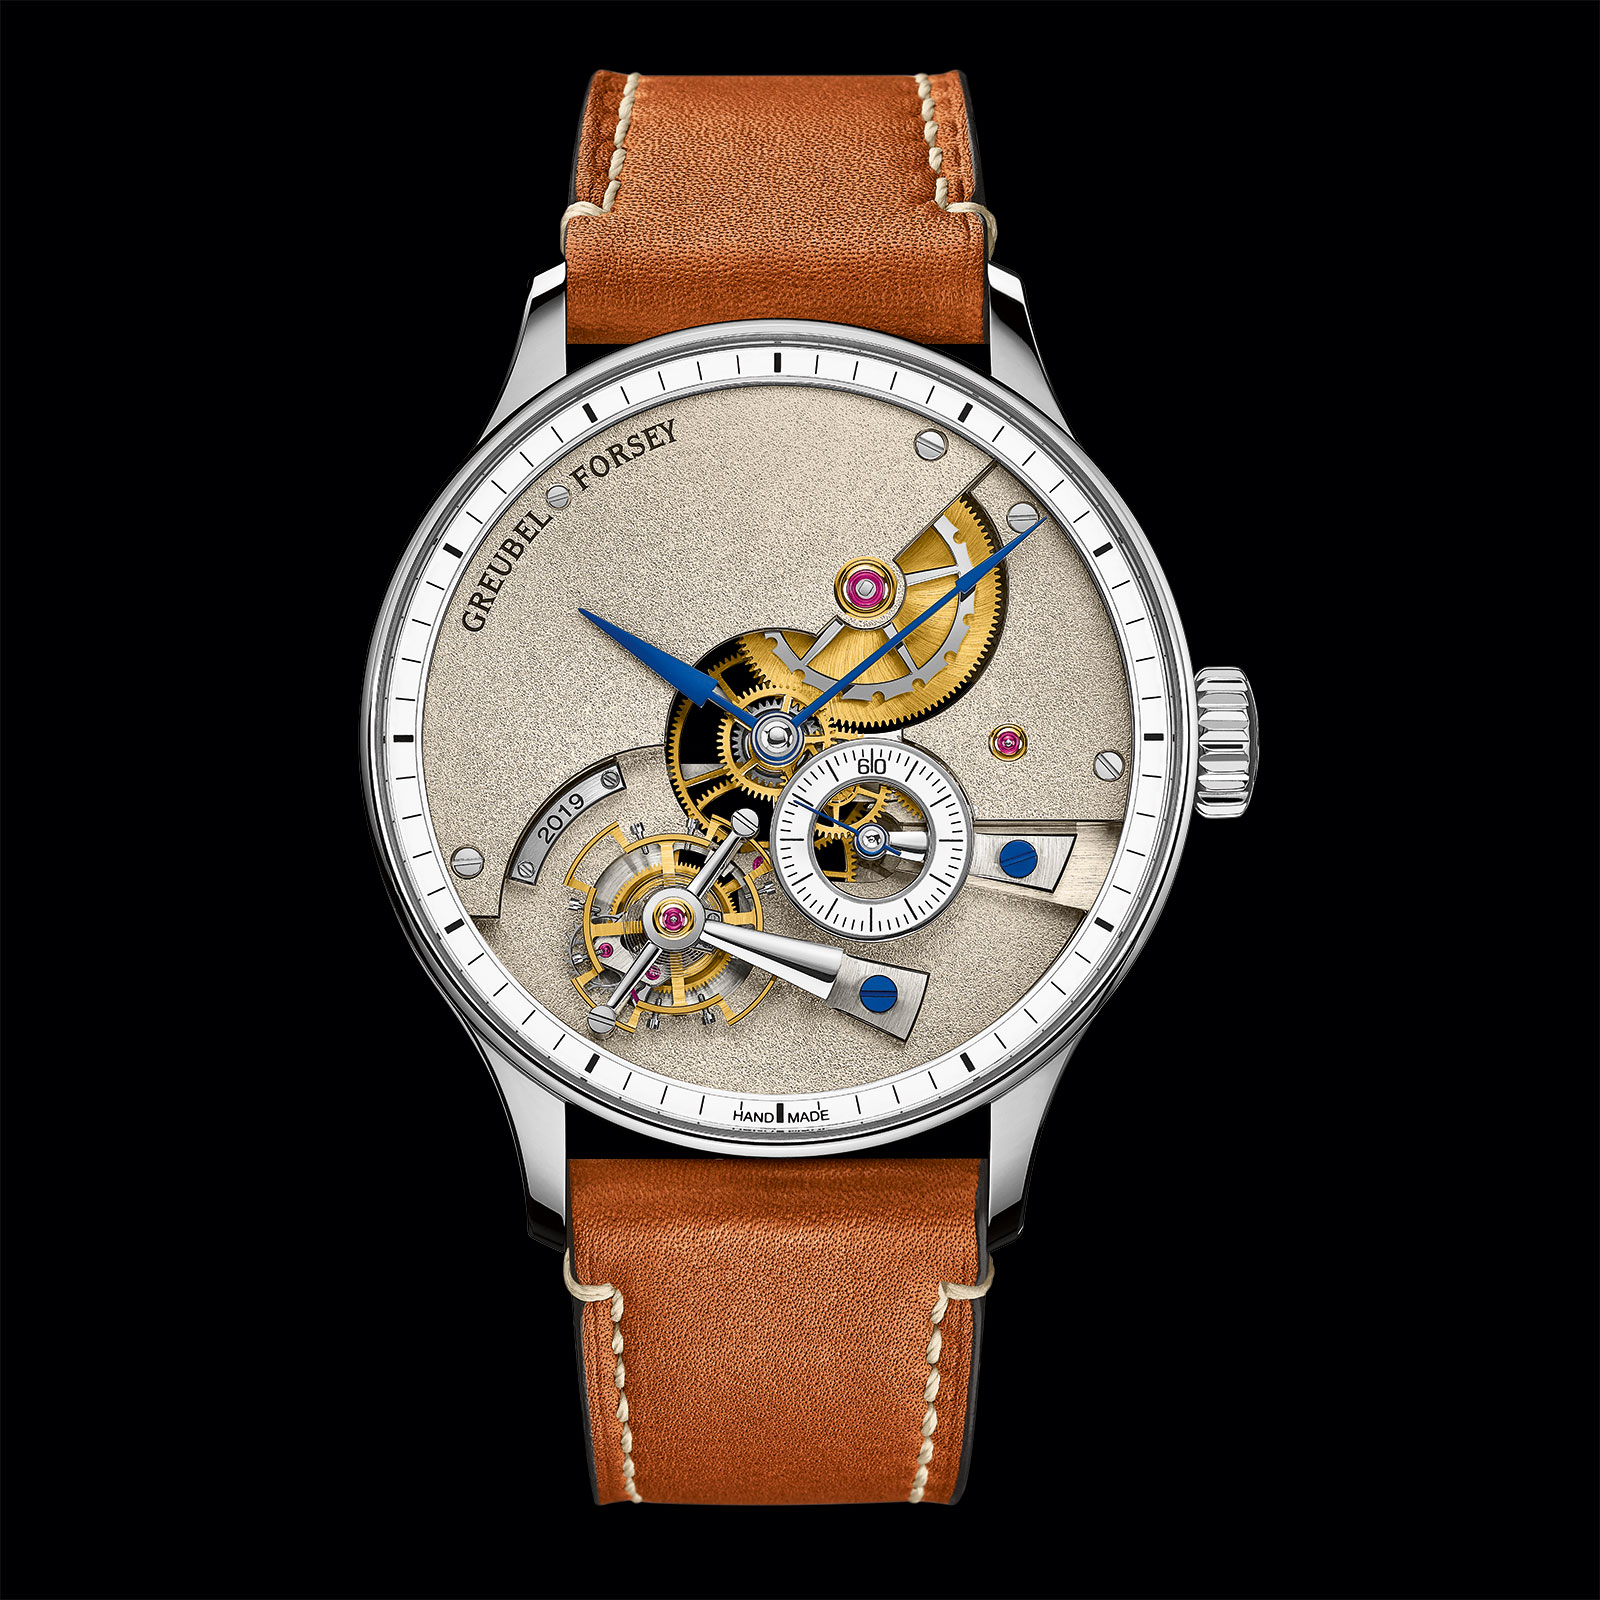 Greubel Forsey Hand Made 1 watch